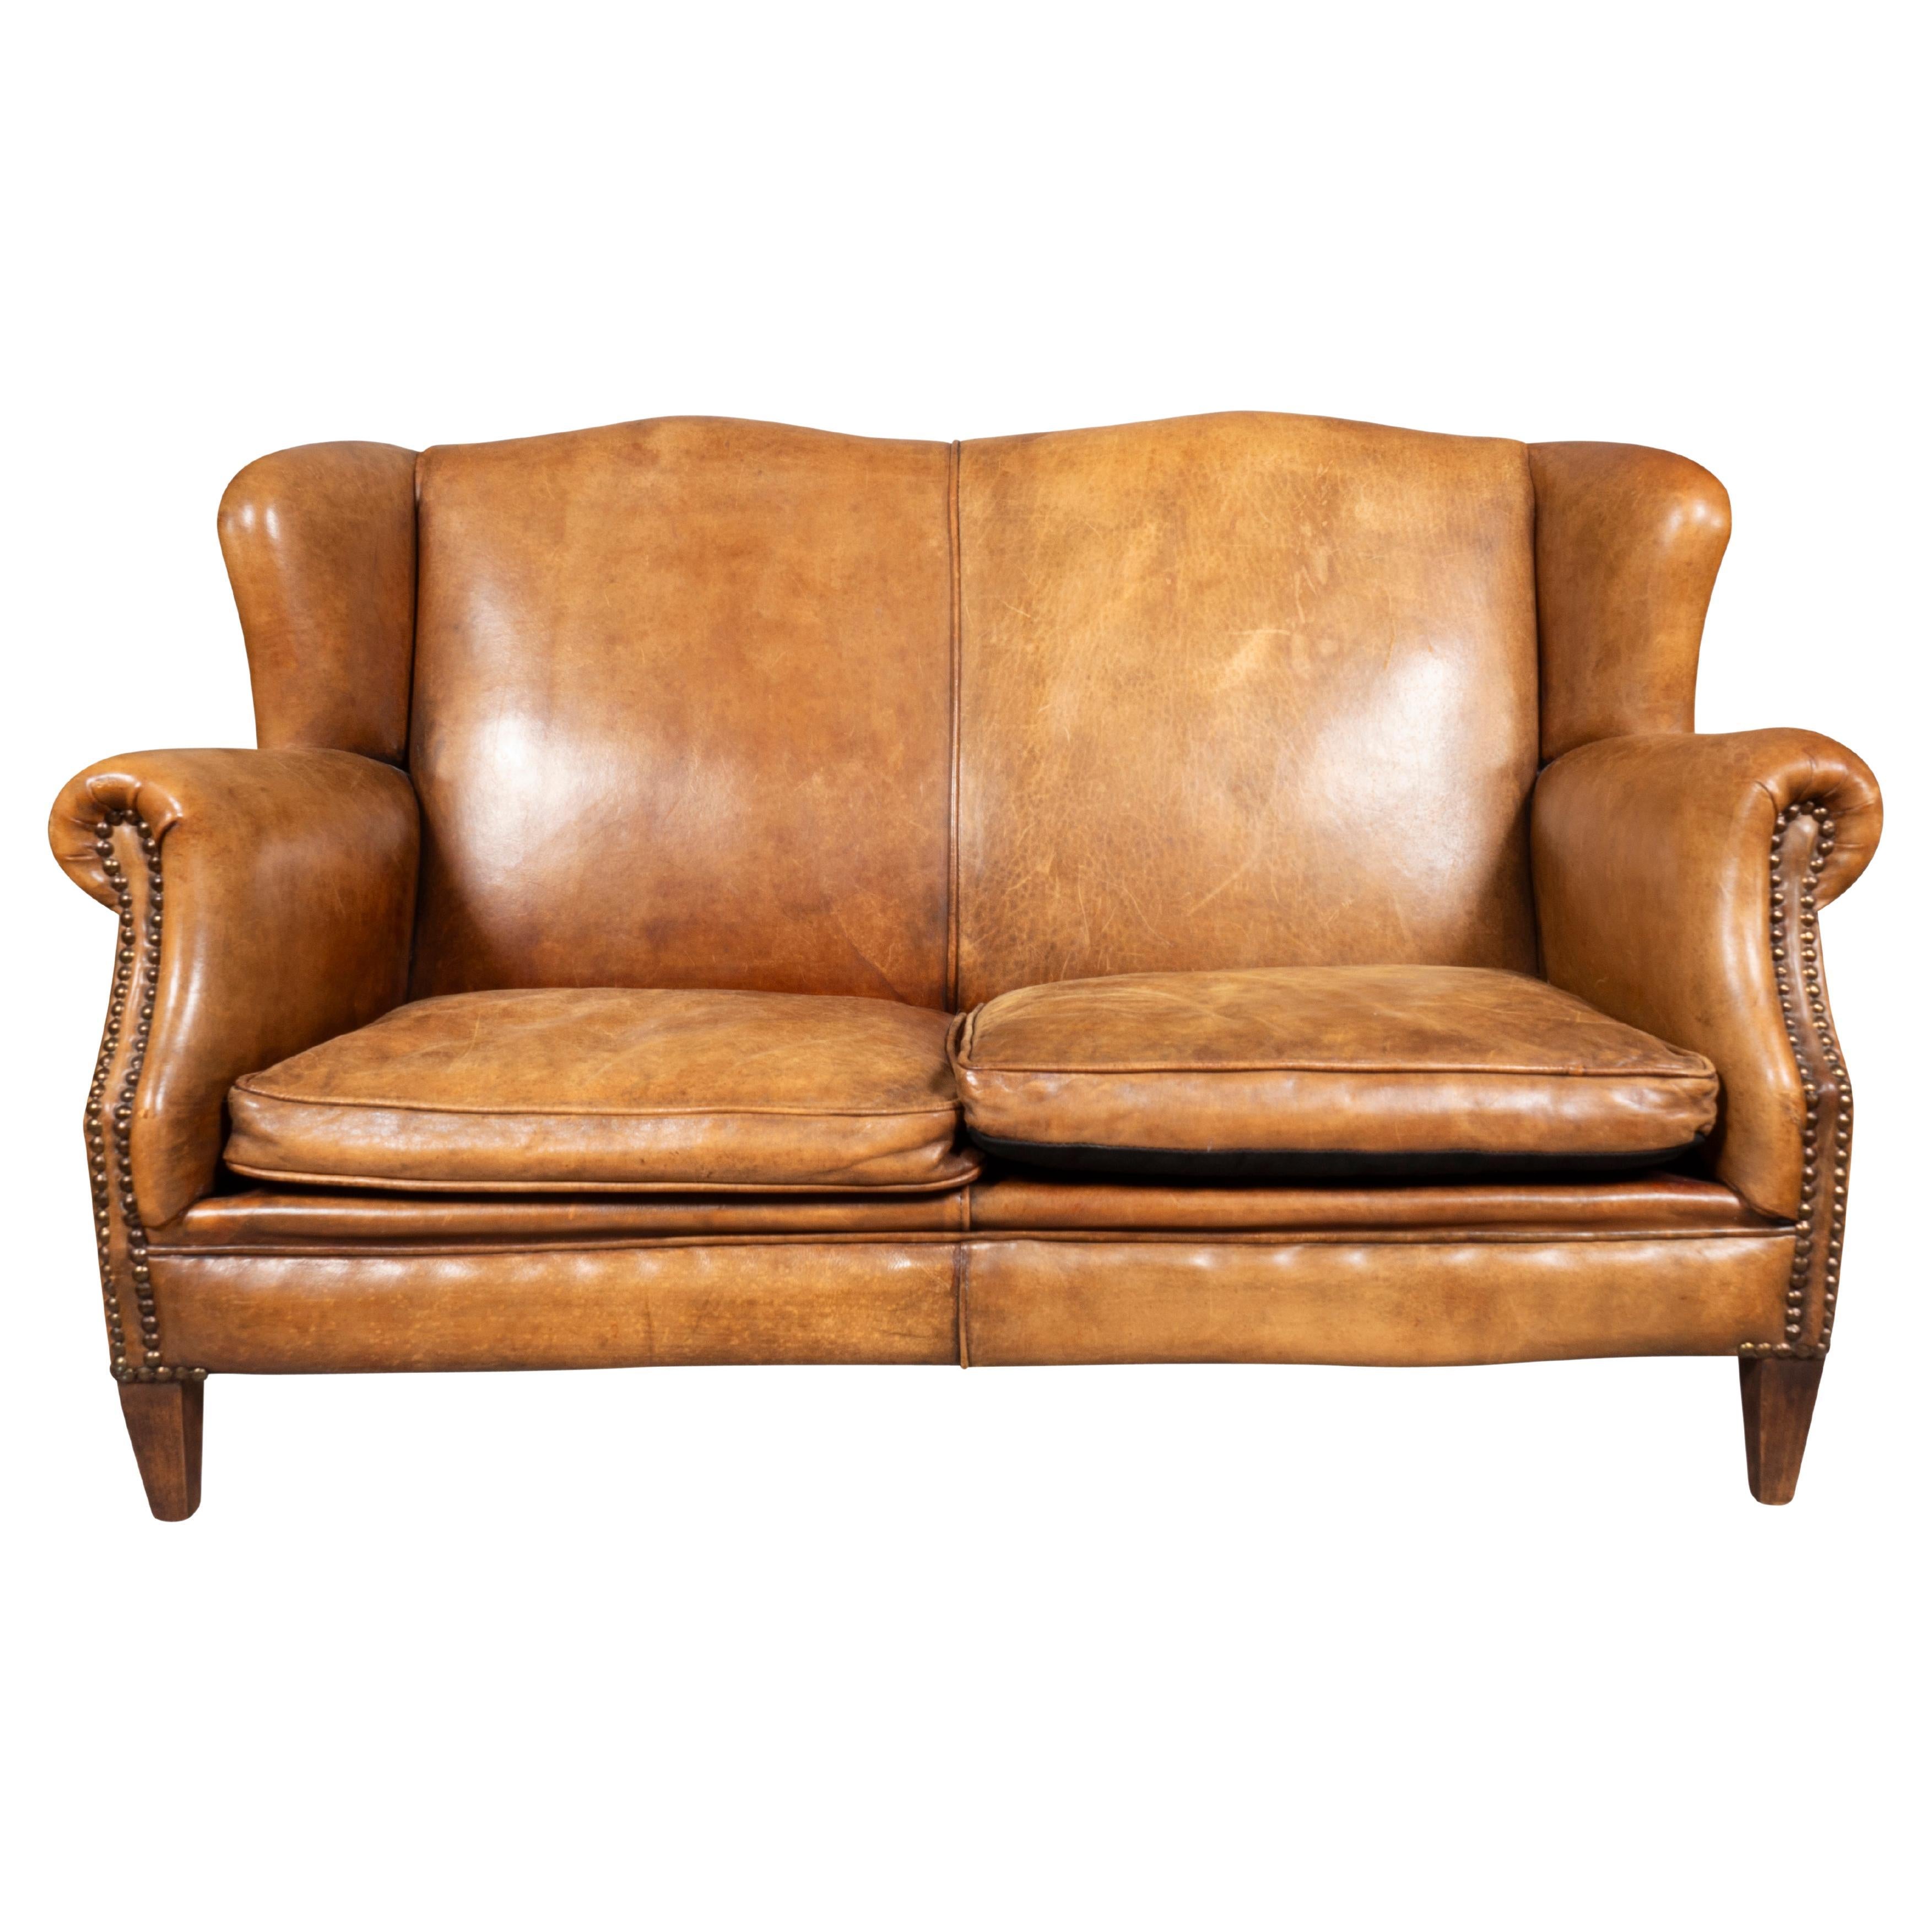 What color goes with a brown leather couch?